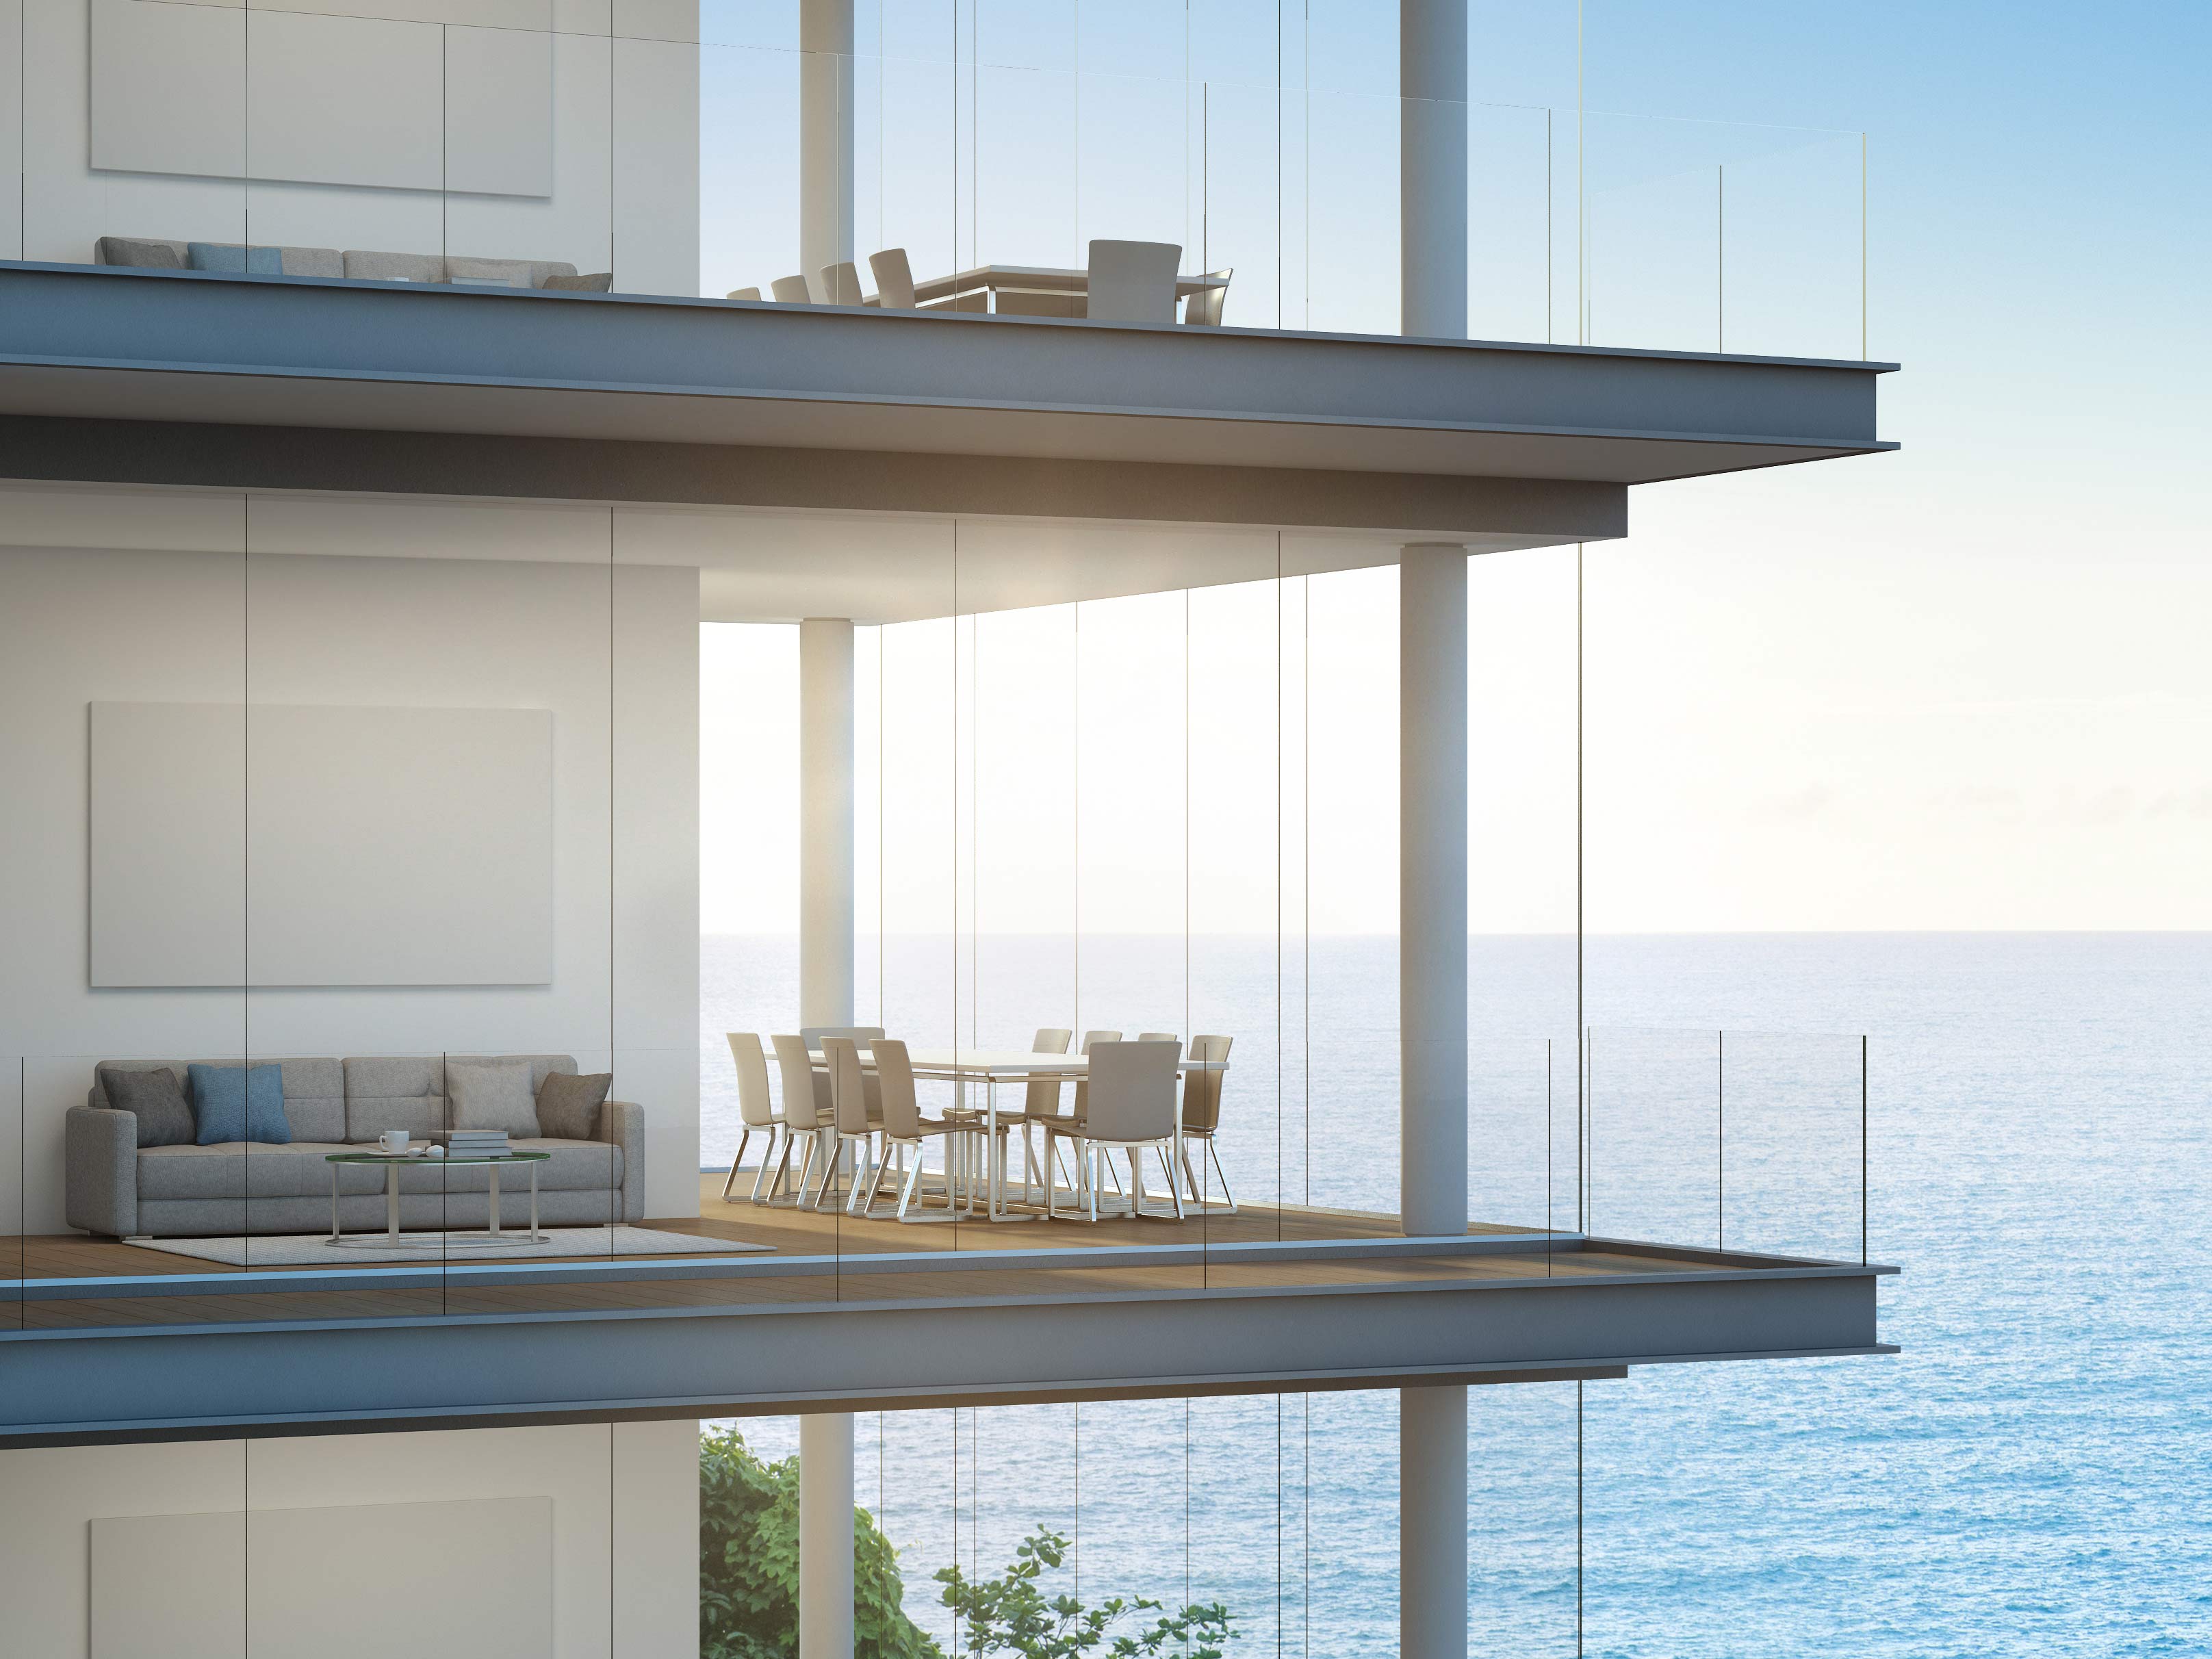 Luxury developments: Contracting for success (Part 2)